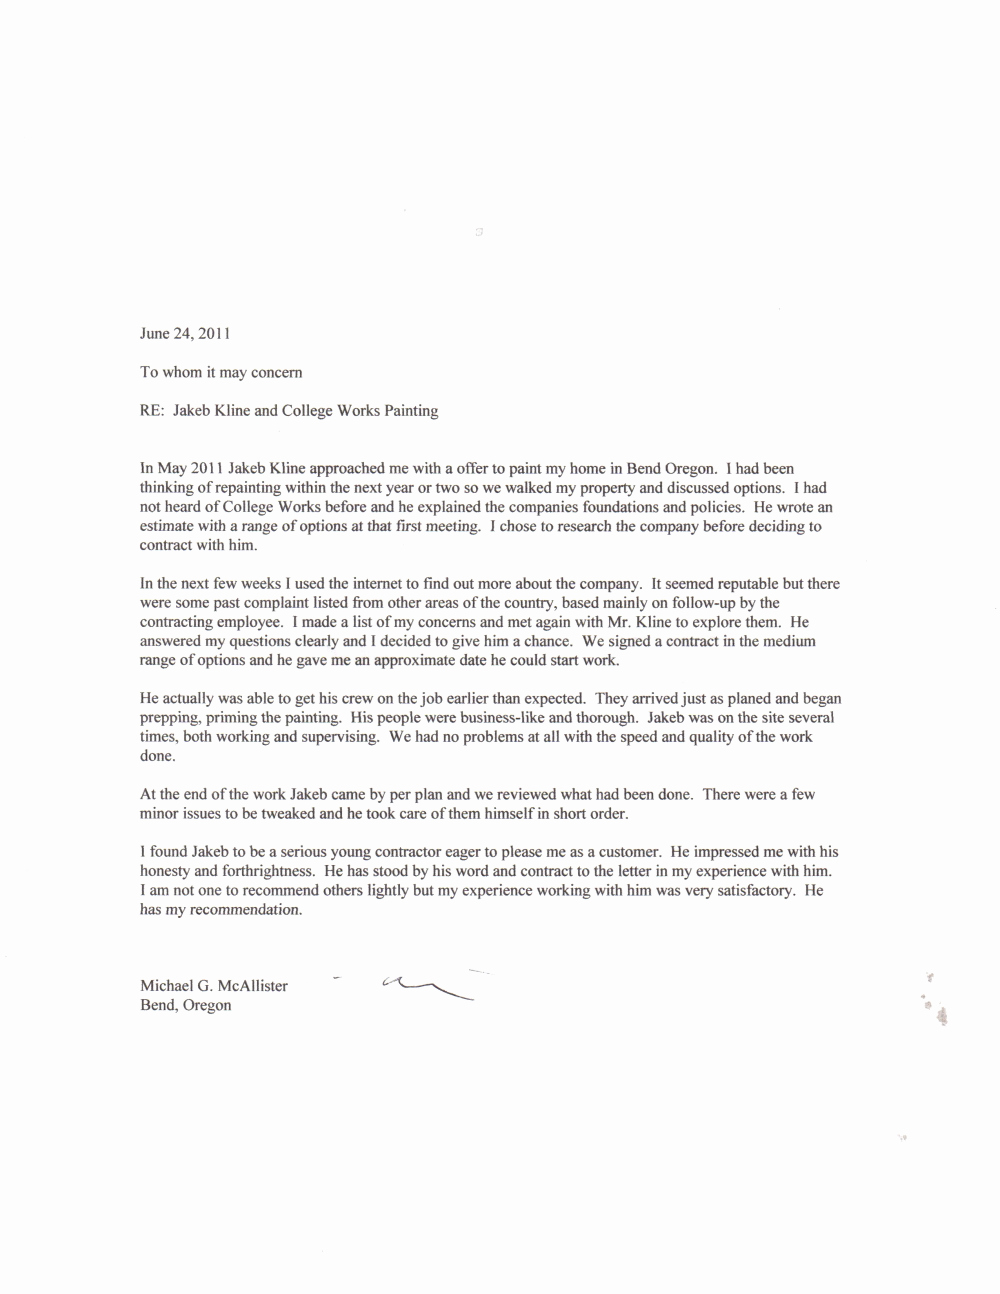 Letters Of Recommendation for College New A Letter Of Re Mendation for Jakeb Klein and College